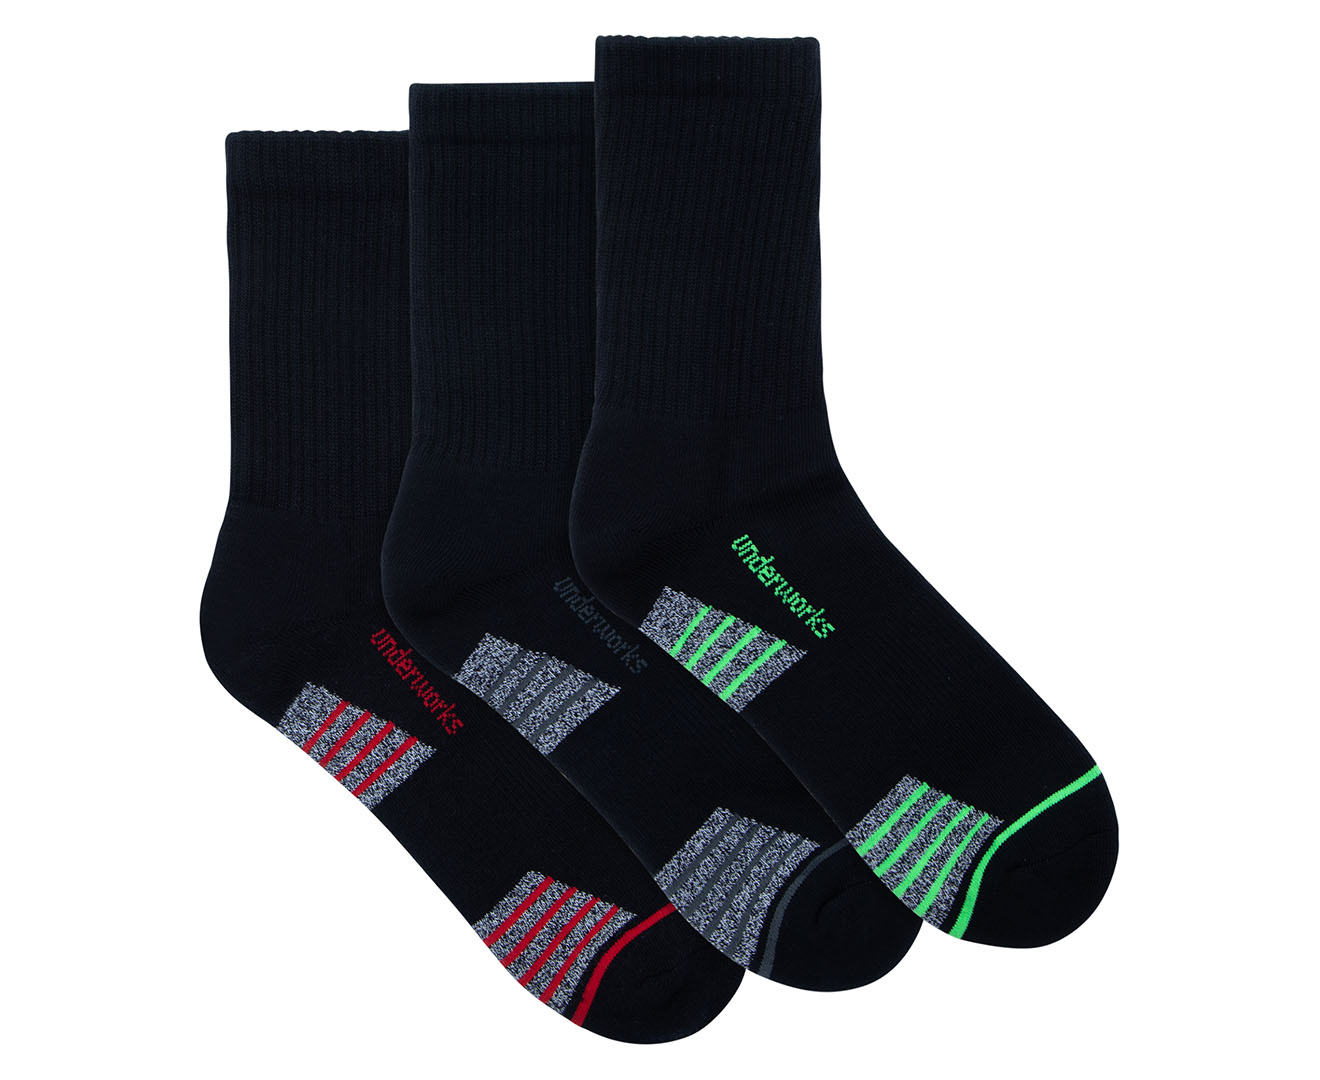 Underworks Men's All Day Cushioned Sole Socks 2 Pack - Black